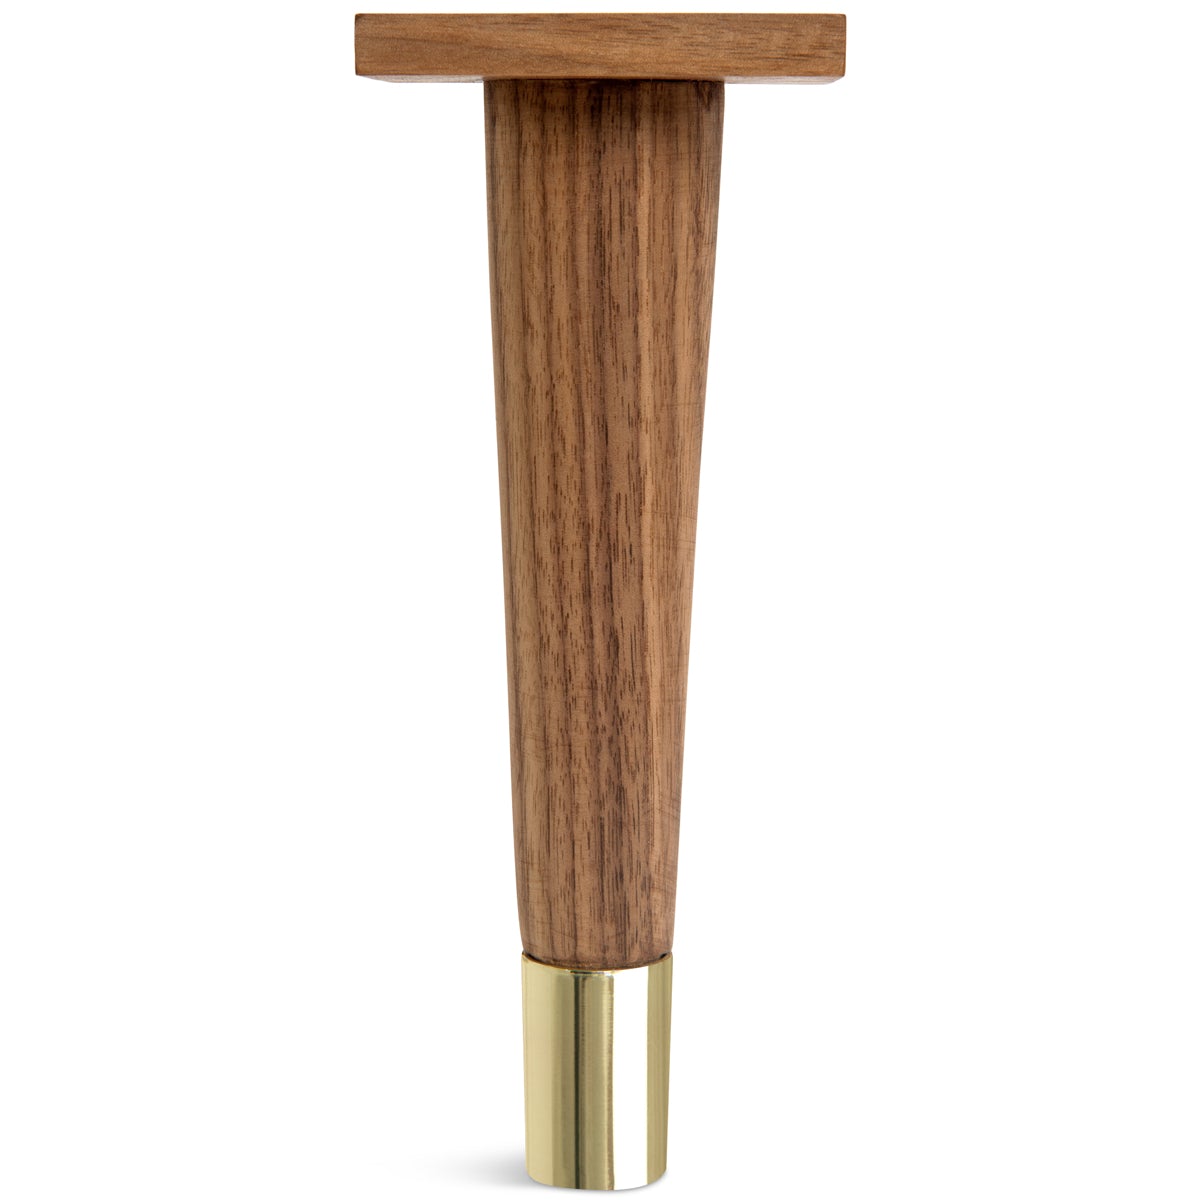 Cone furniture leg in oiled walnut with a shiny brass foot cap and an integrated mounting plate.